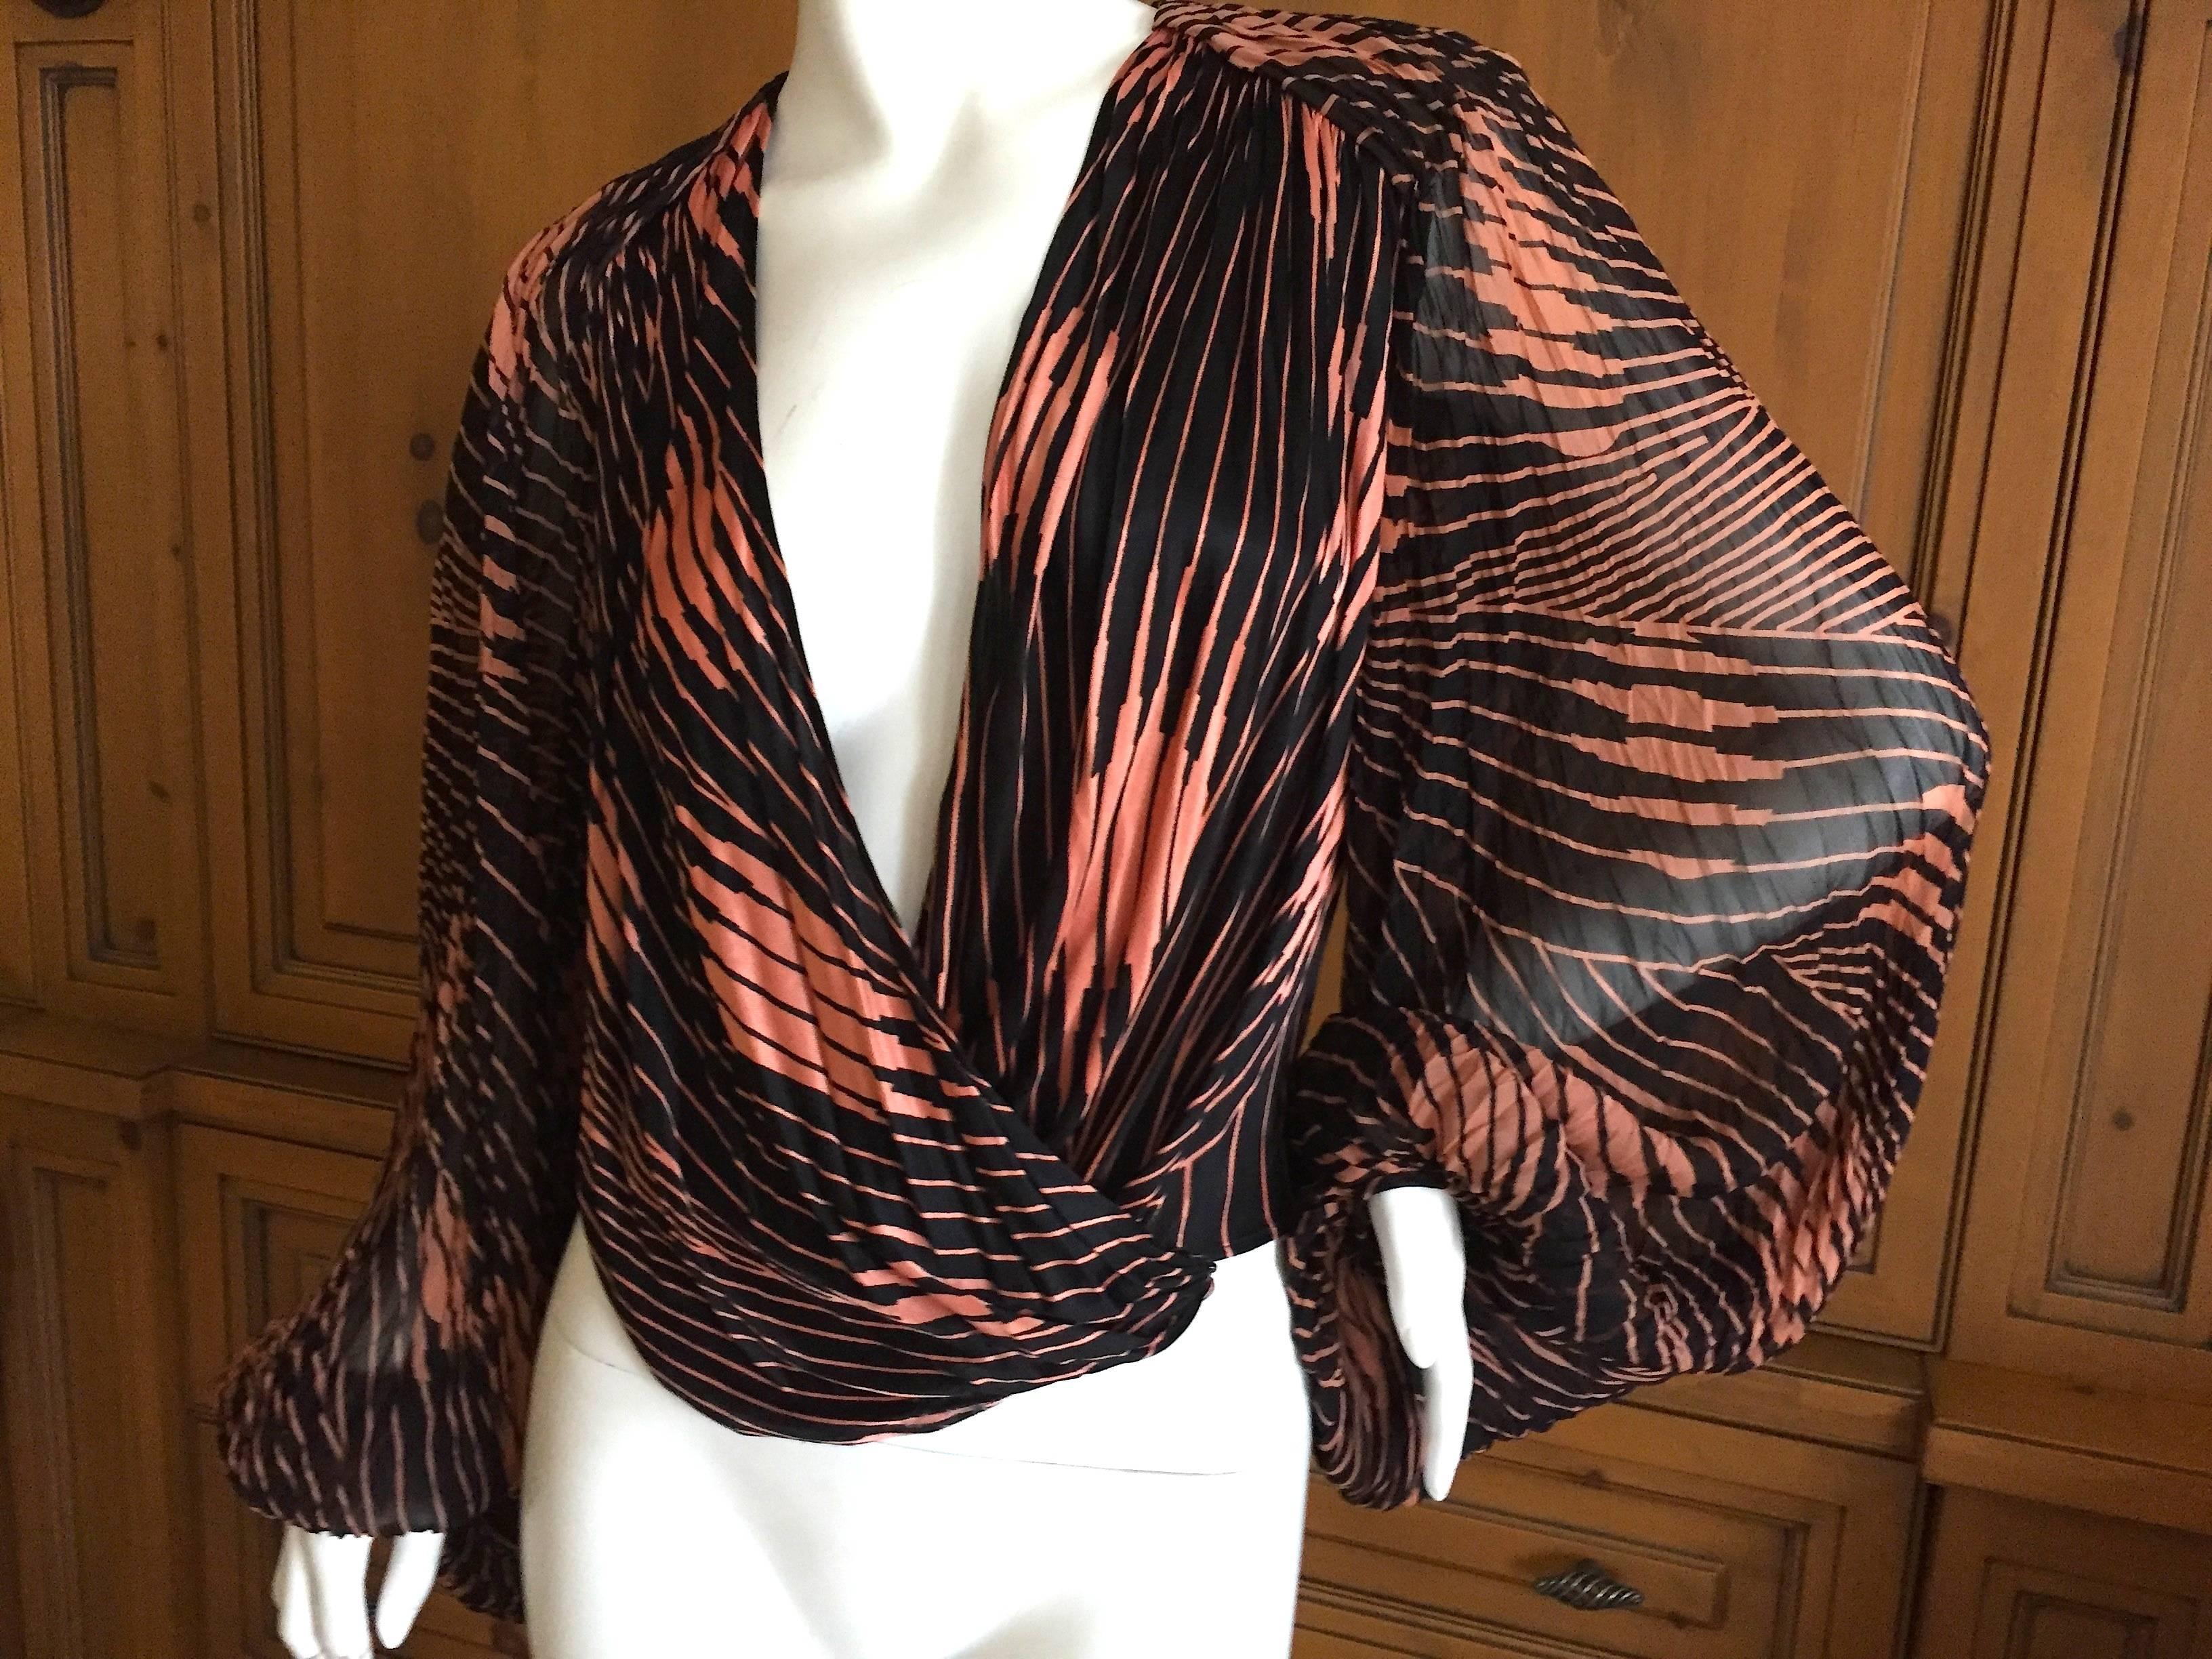 Beautifully tailored sheer low cut wrap blouse from Gianni Versace.1980's.
The details are so pretty, shirring at the shoulders and billowing romantic sleeves, pure sexiness from early Gianni Versace.